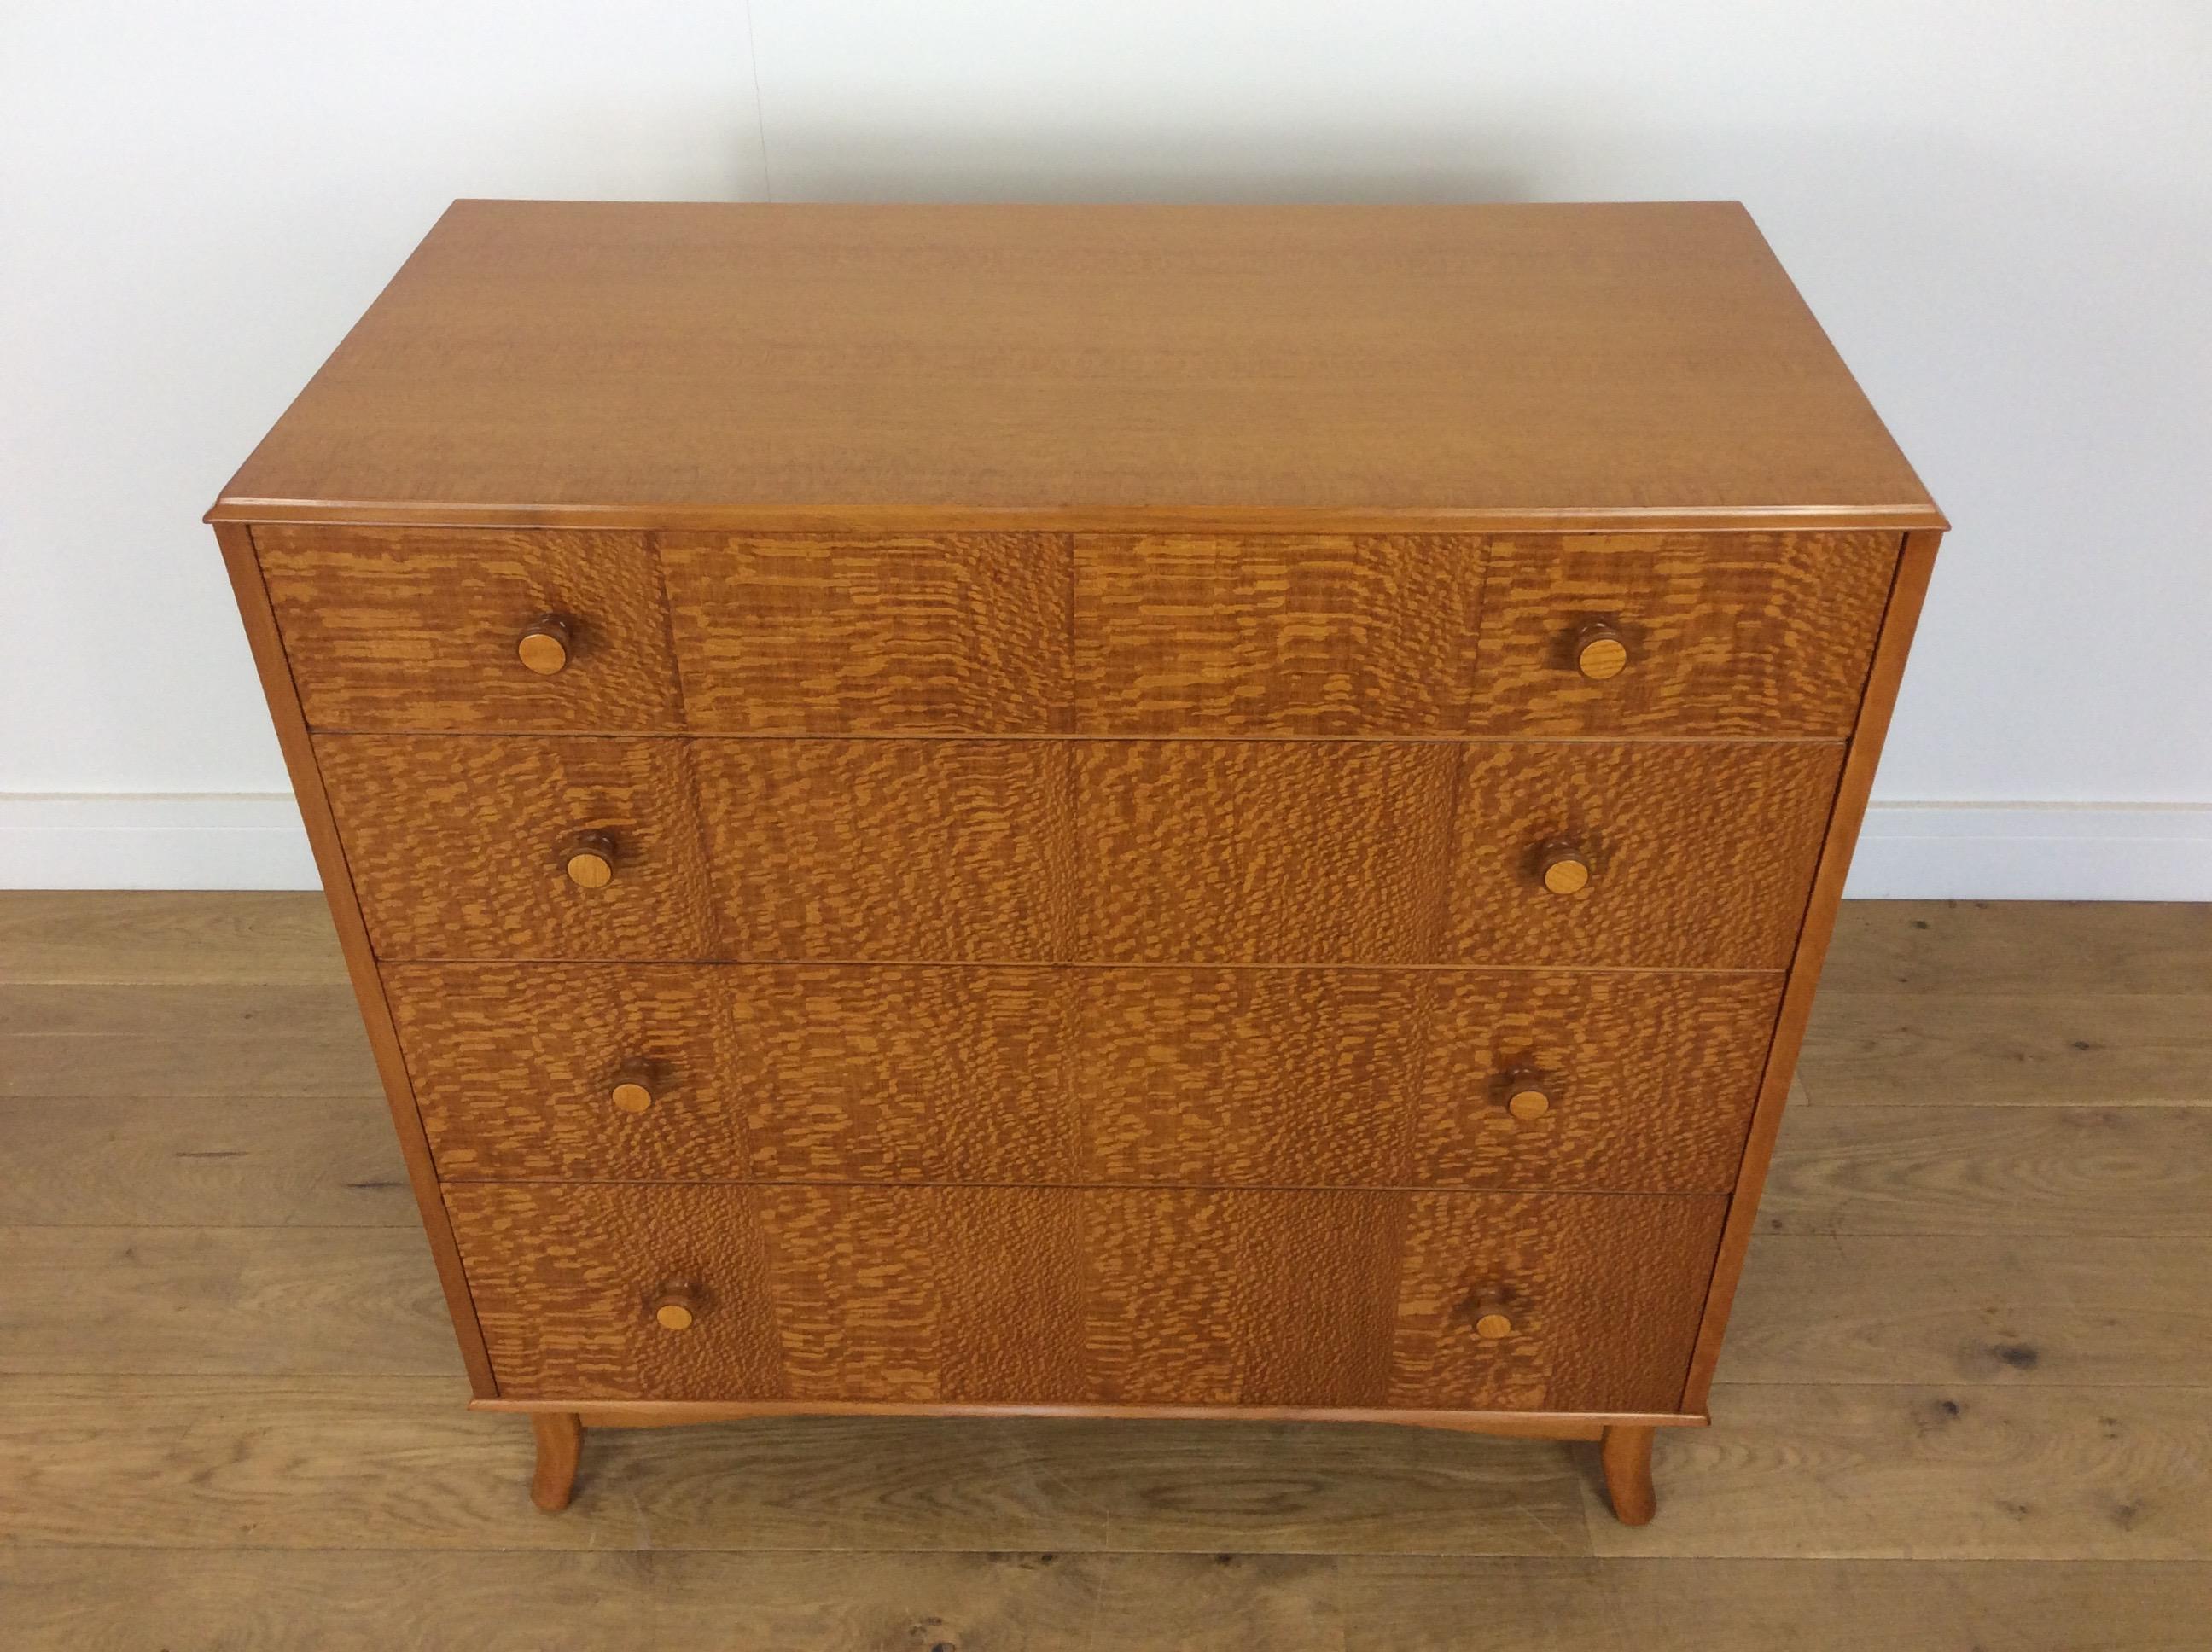 Midcentury chest of drawers in a stunning lacewood.
Measures: 89 cm H, 92 cm W, 46 cm D.
British, circa 1960.